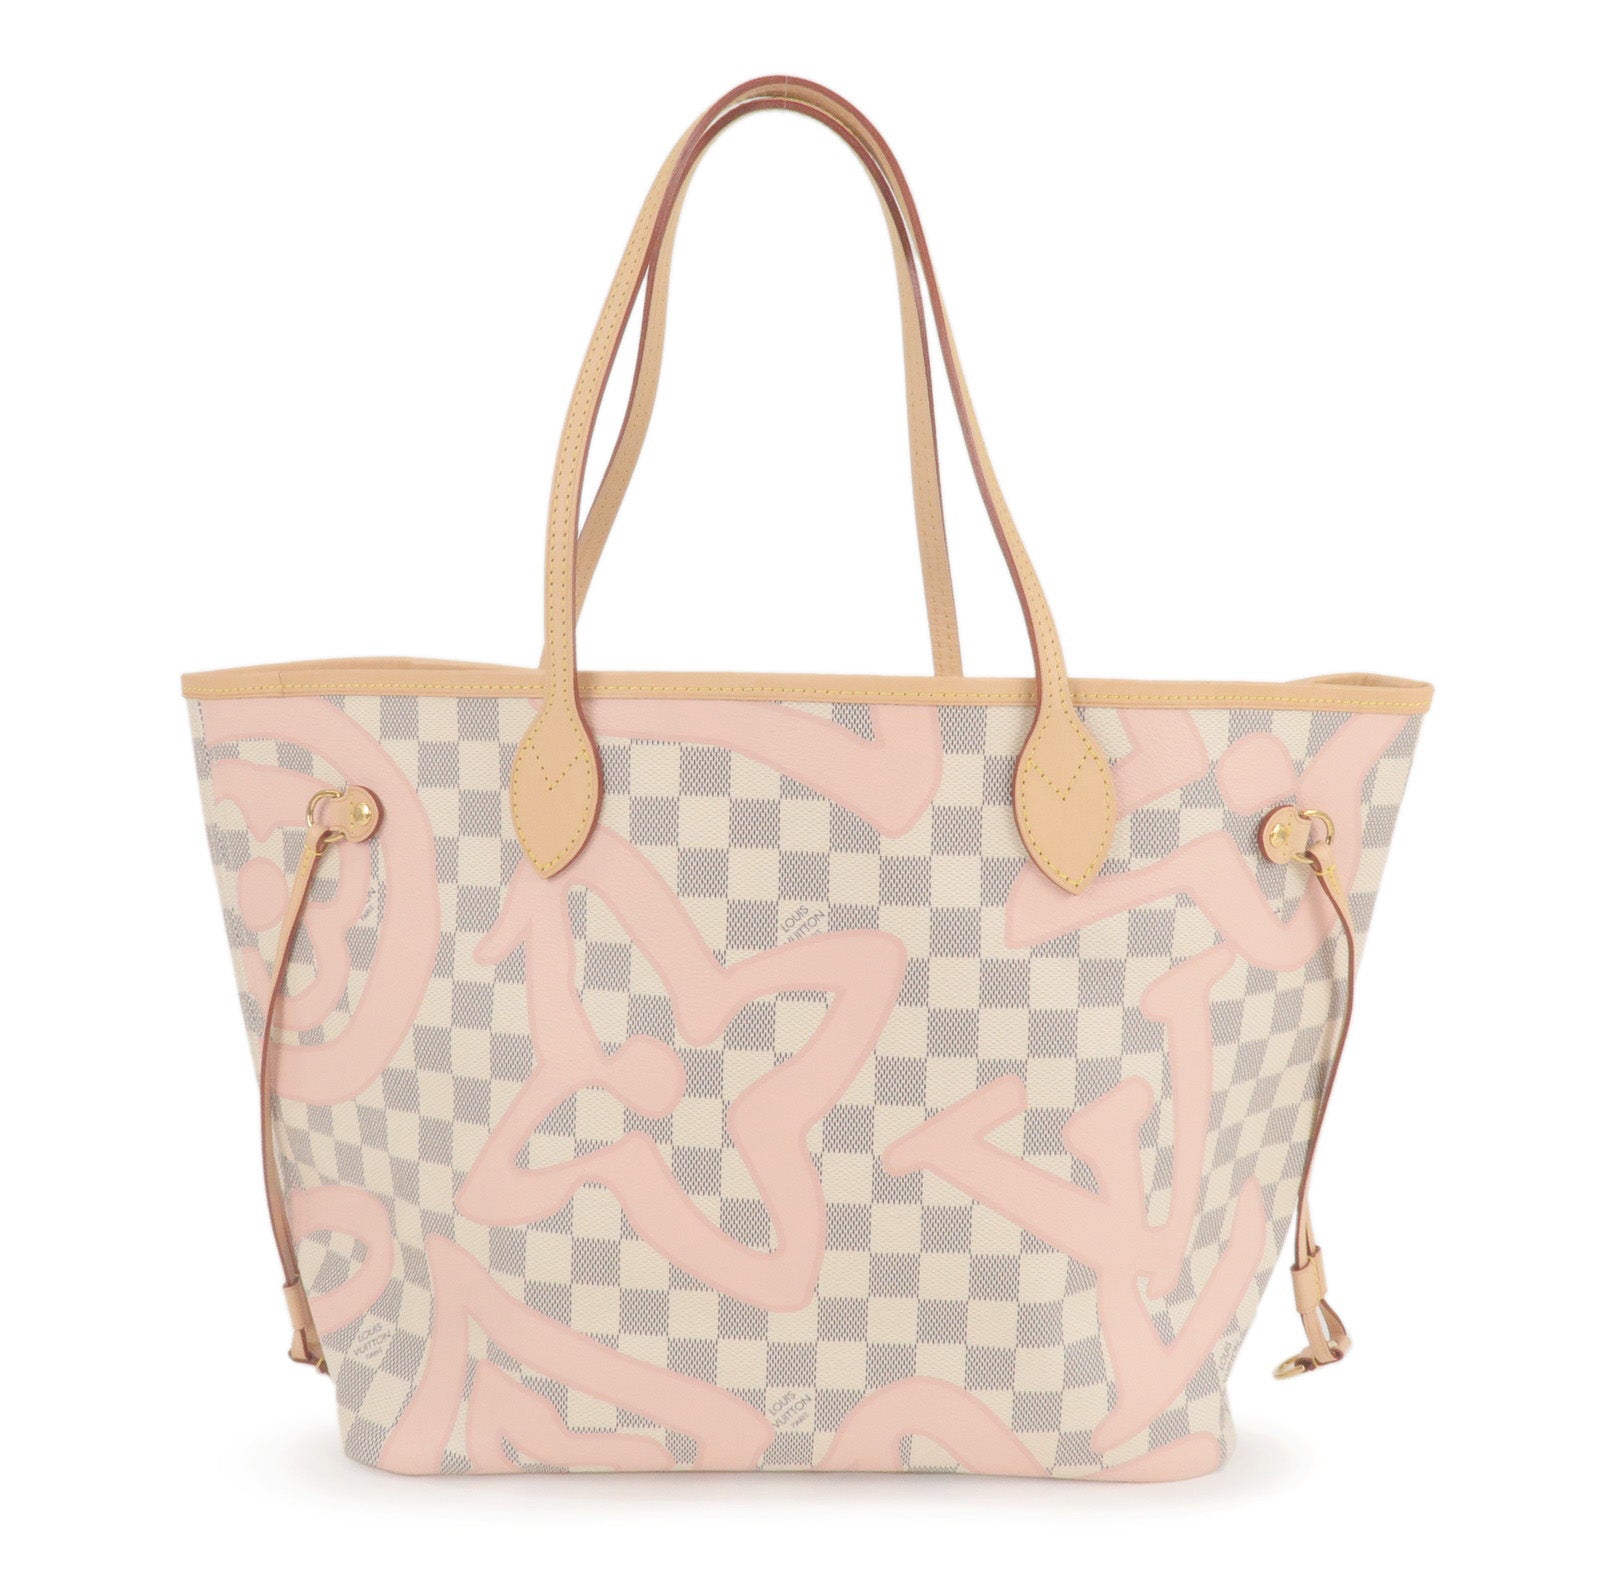 Louis Vuitton Neverfull Tahitienne MM Tote in Damier Azur Canvas Mint  Condition